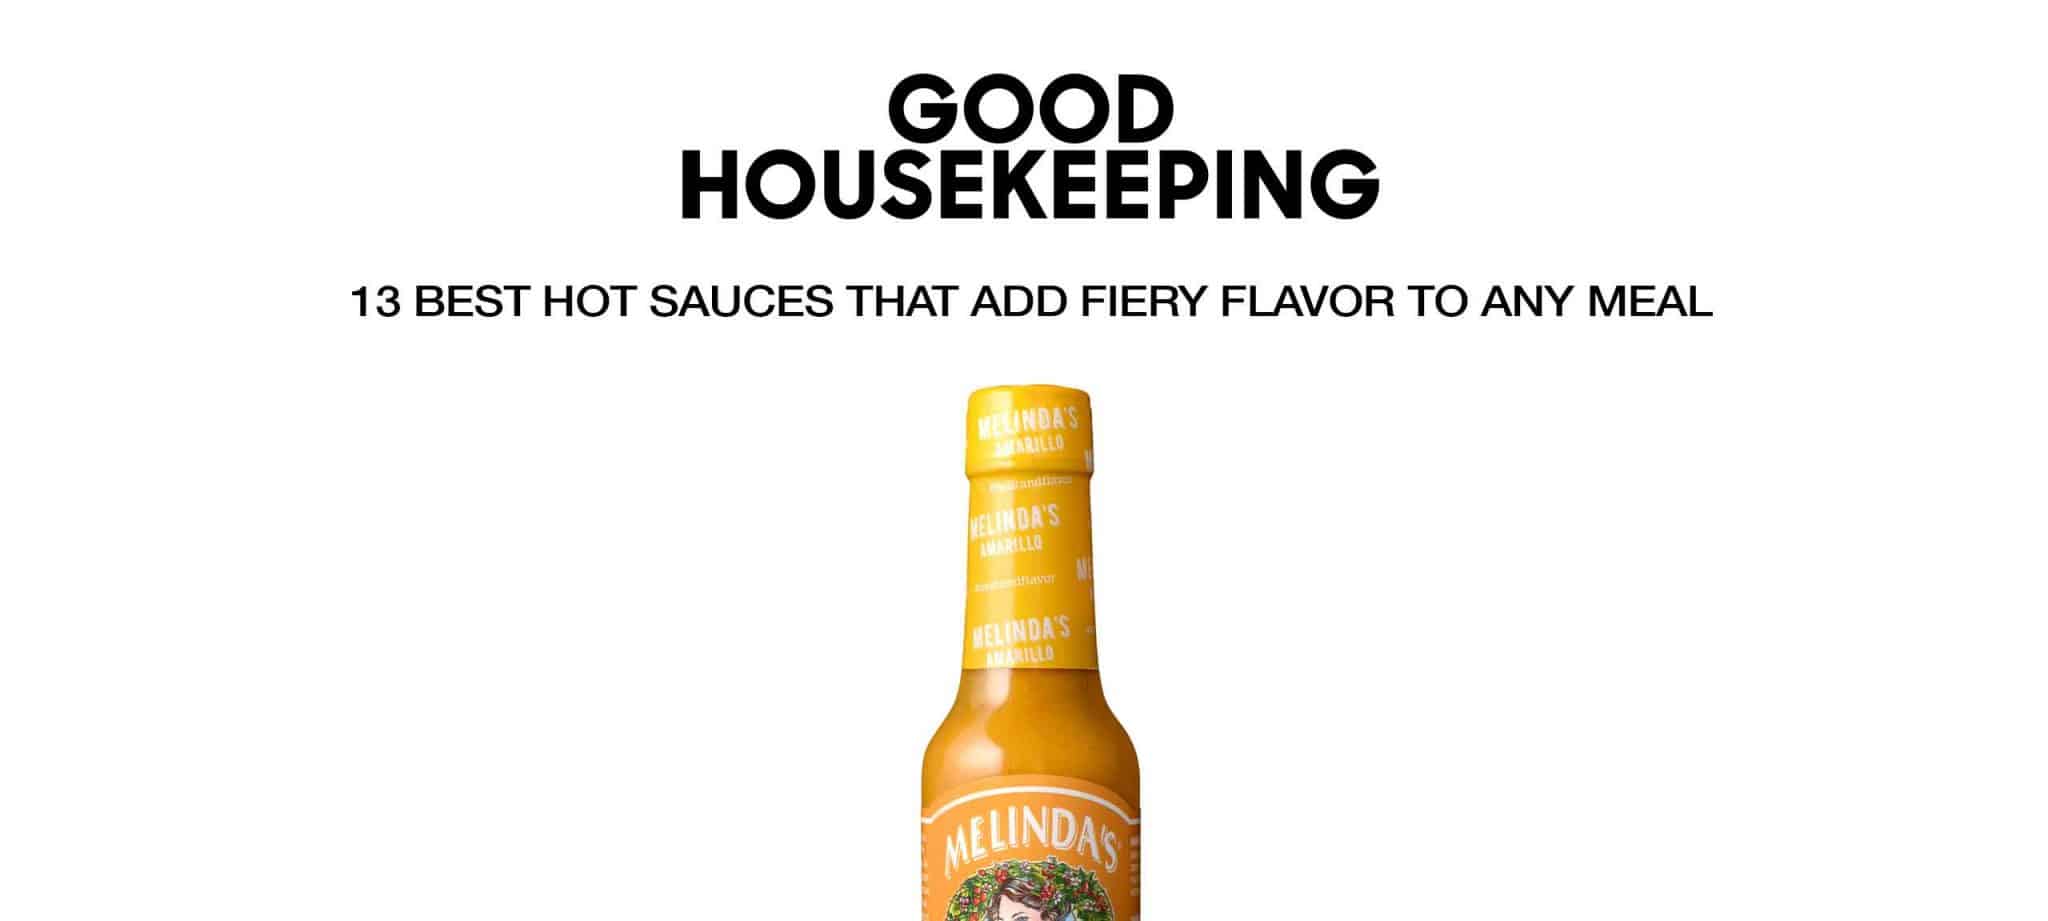 13 Best Hot Sauces That Add Fiery Flavor to Any Meal | Says Good Housekeeping